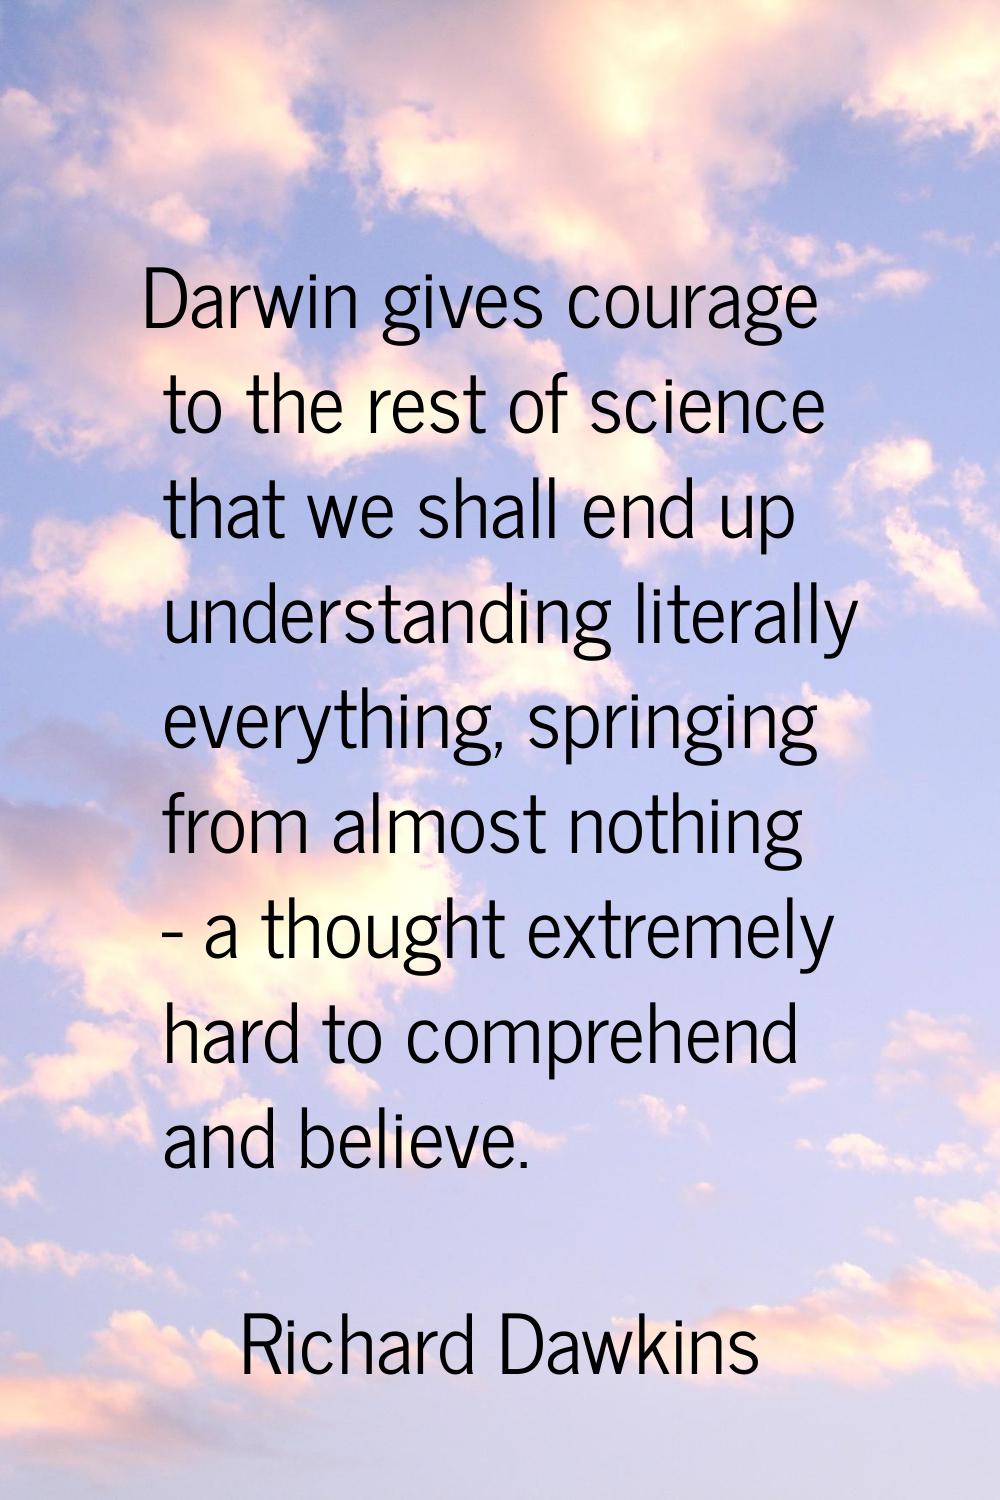 Darwin gives courage to the rest of science that we shall end up understanding literally everything